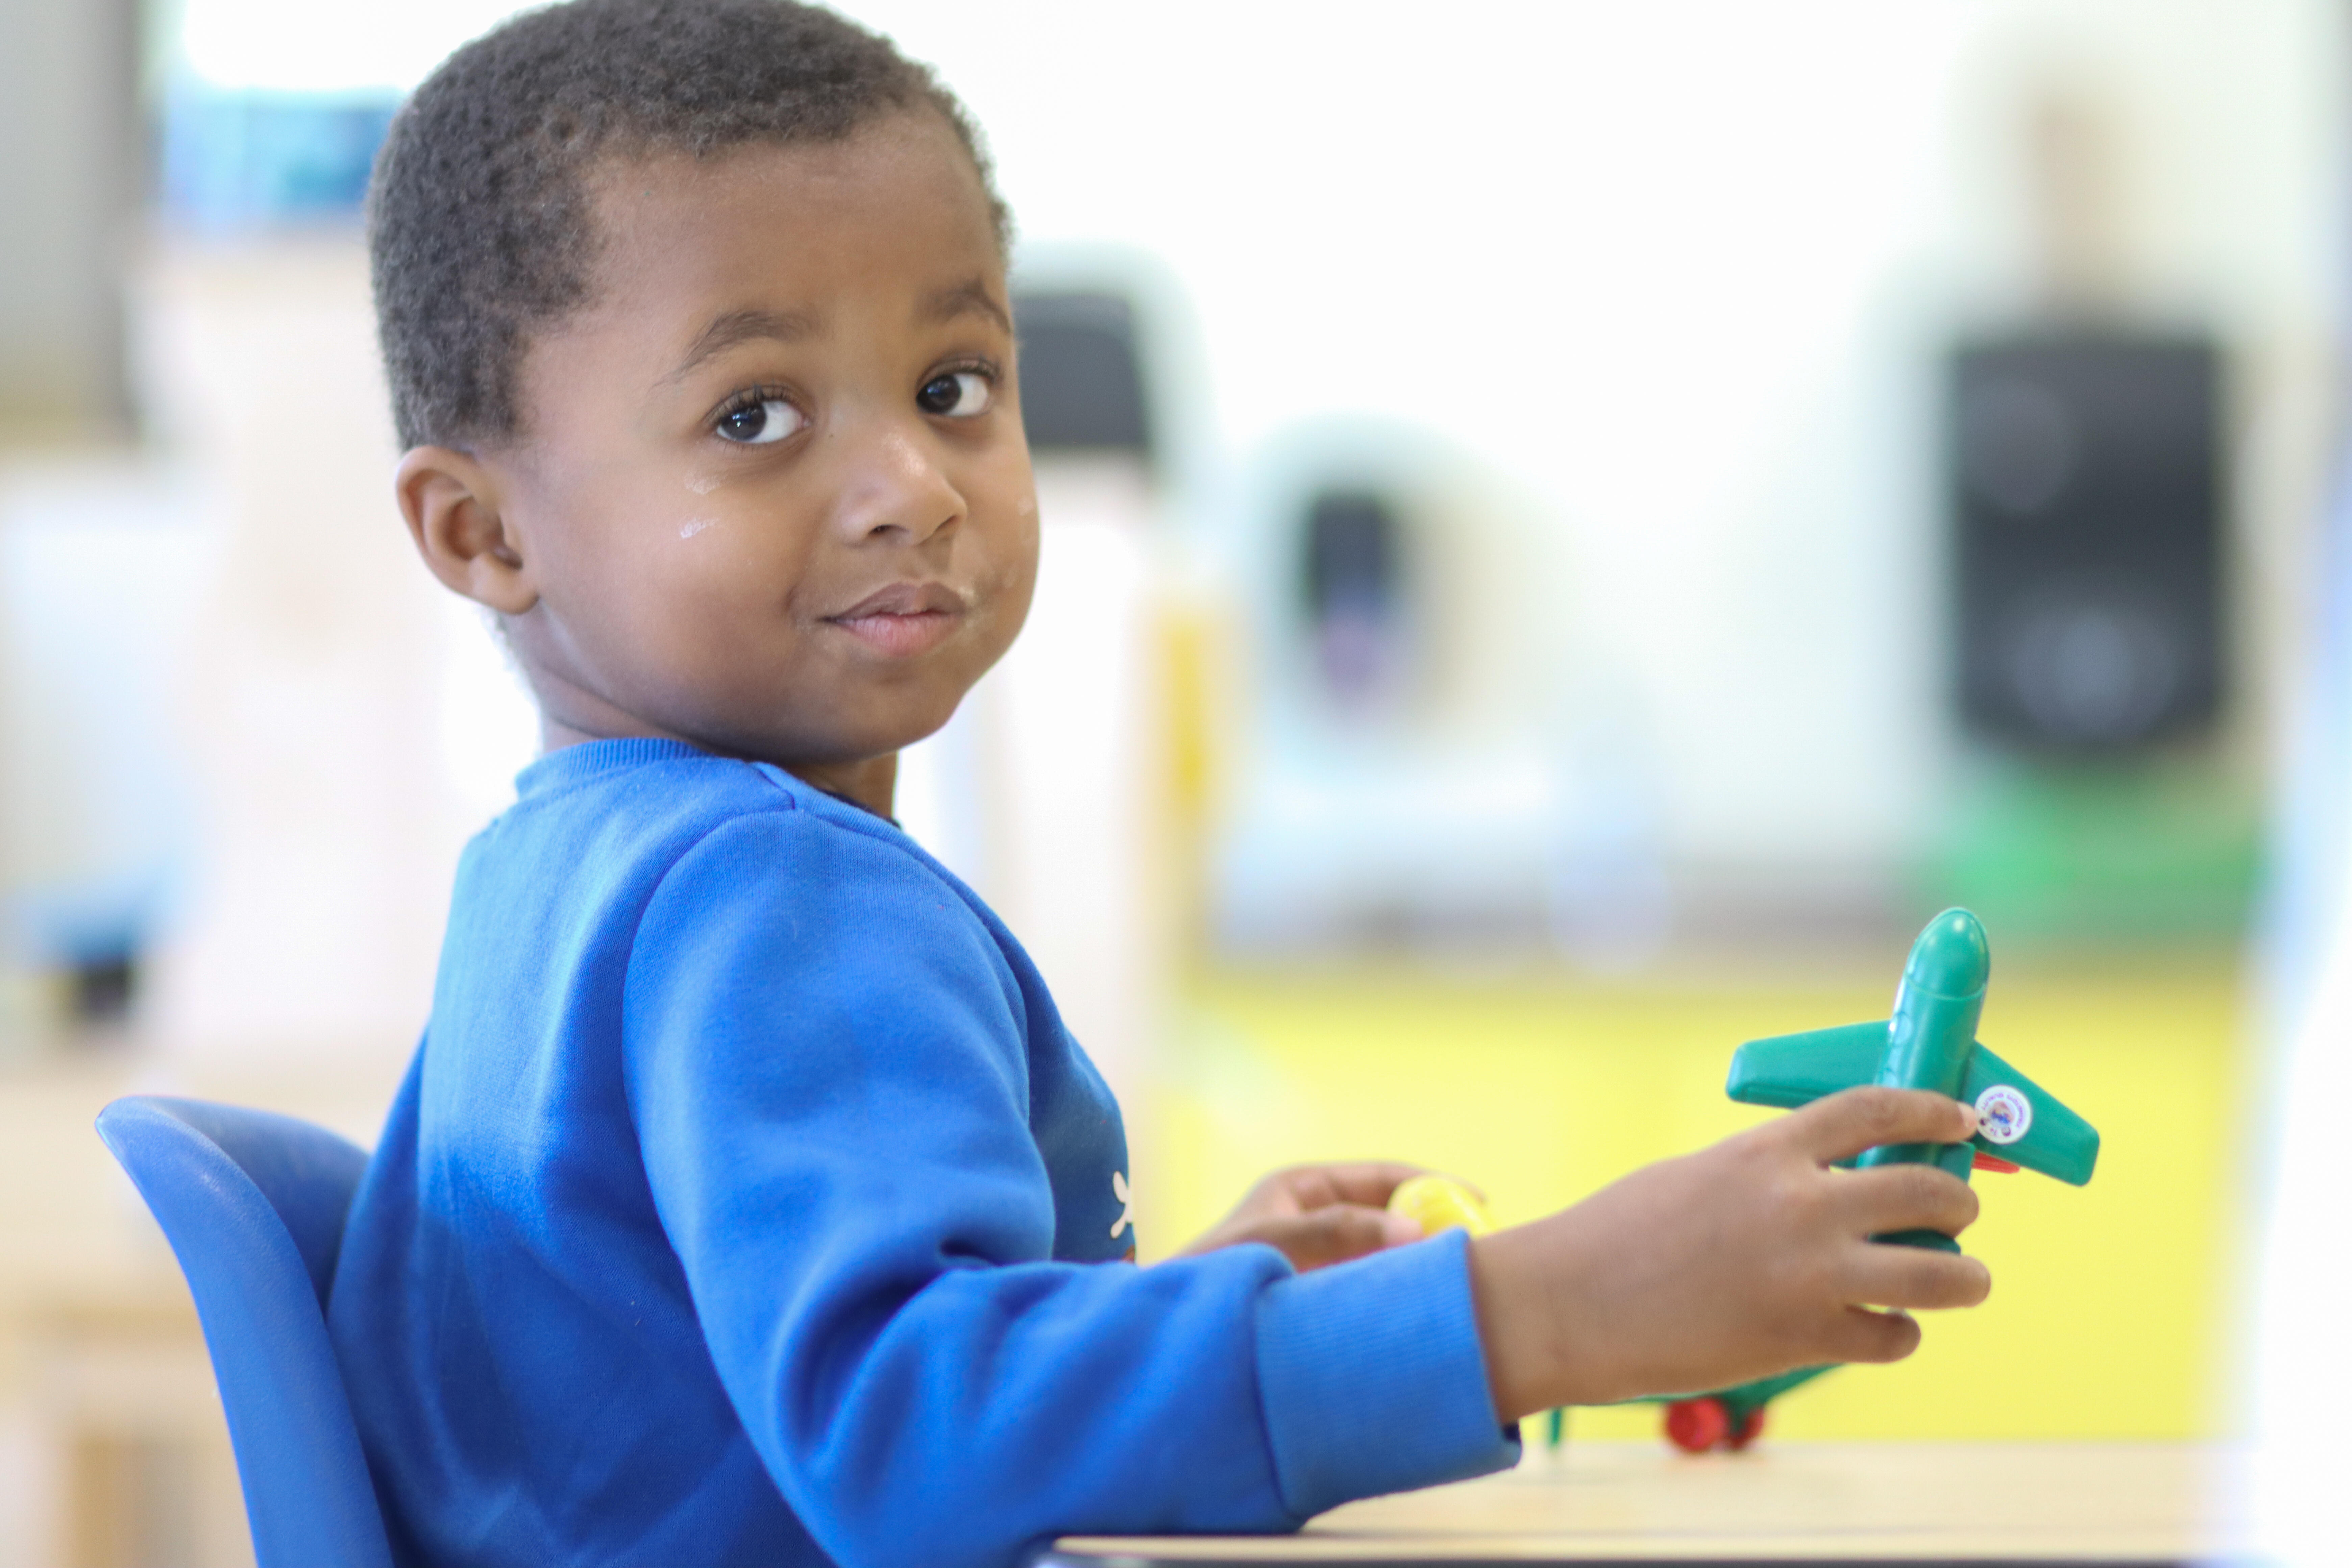 Pre-K student smiling while playing with a toy airplane